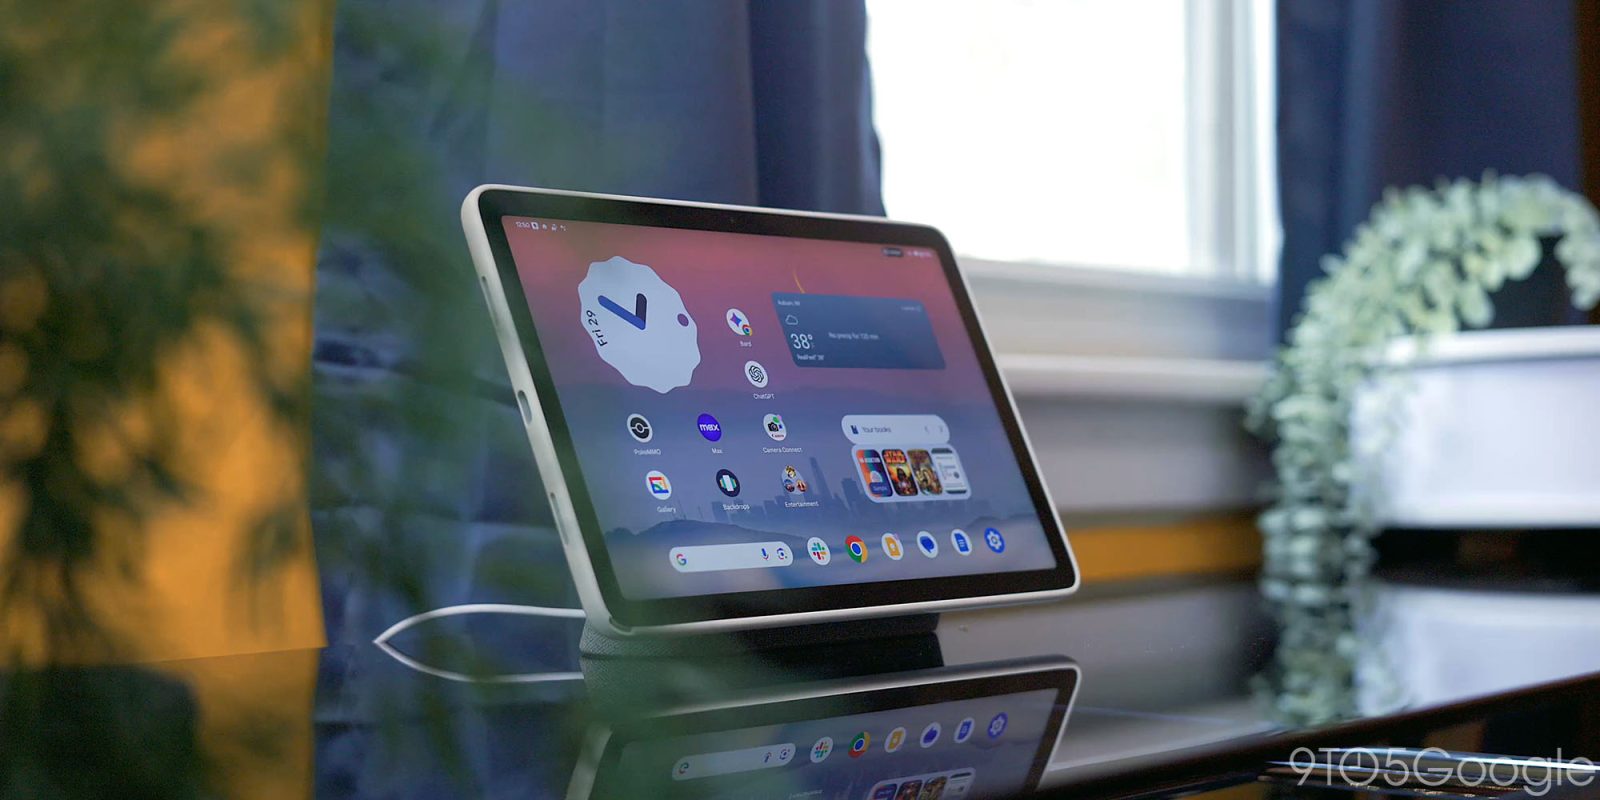 Pixel Tablet keyboard and dock-less price hinted at in retail listings